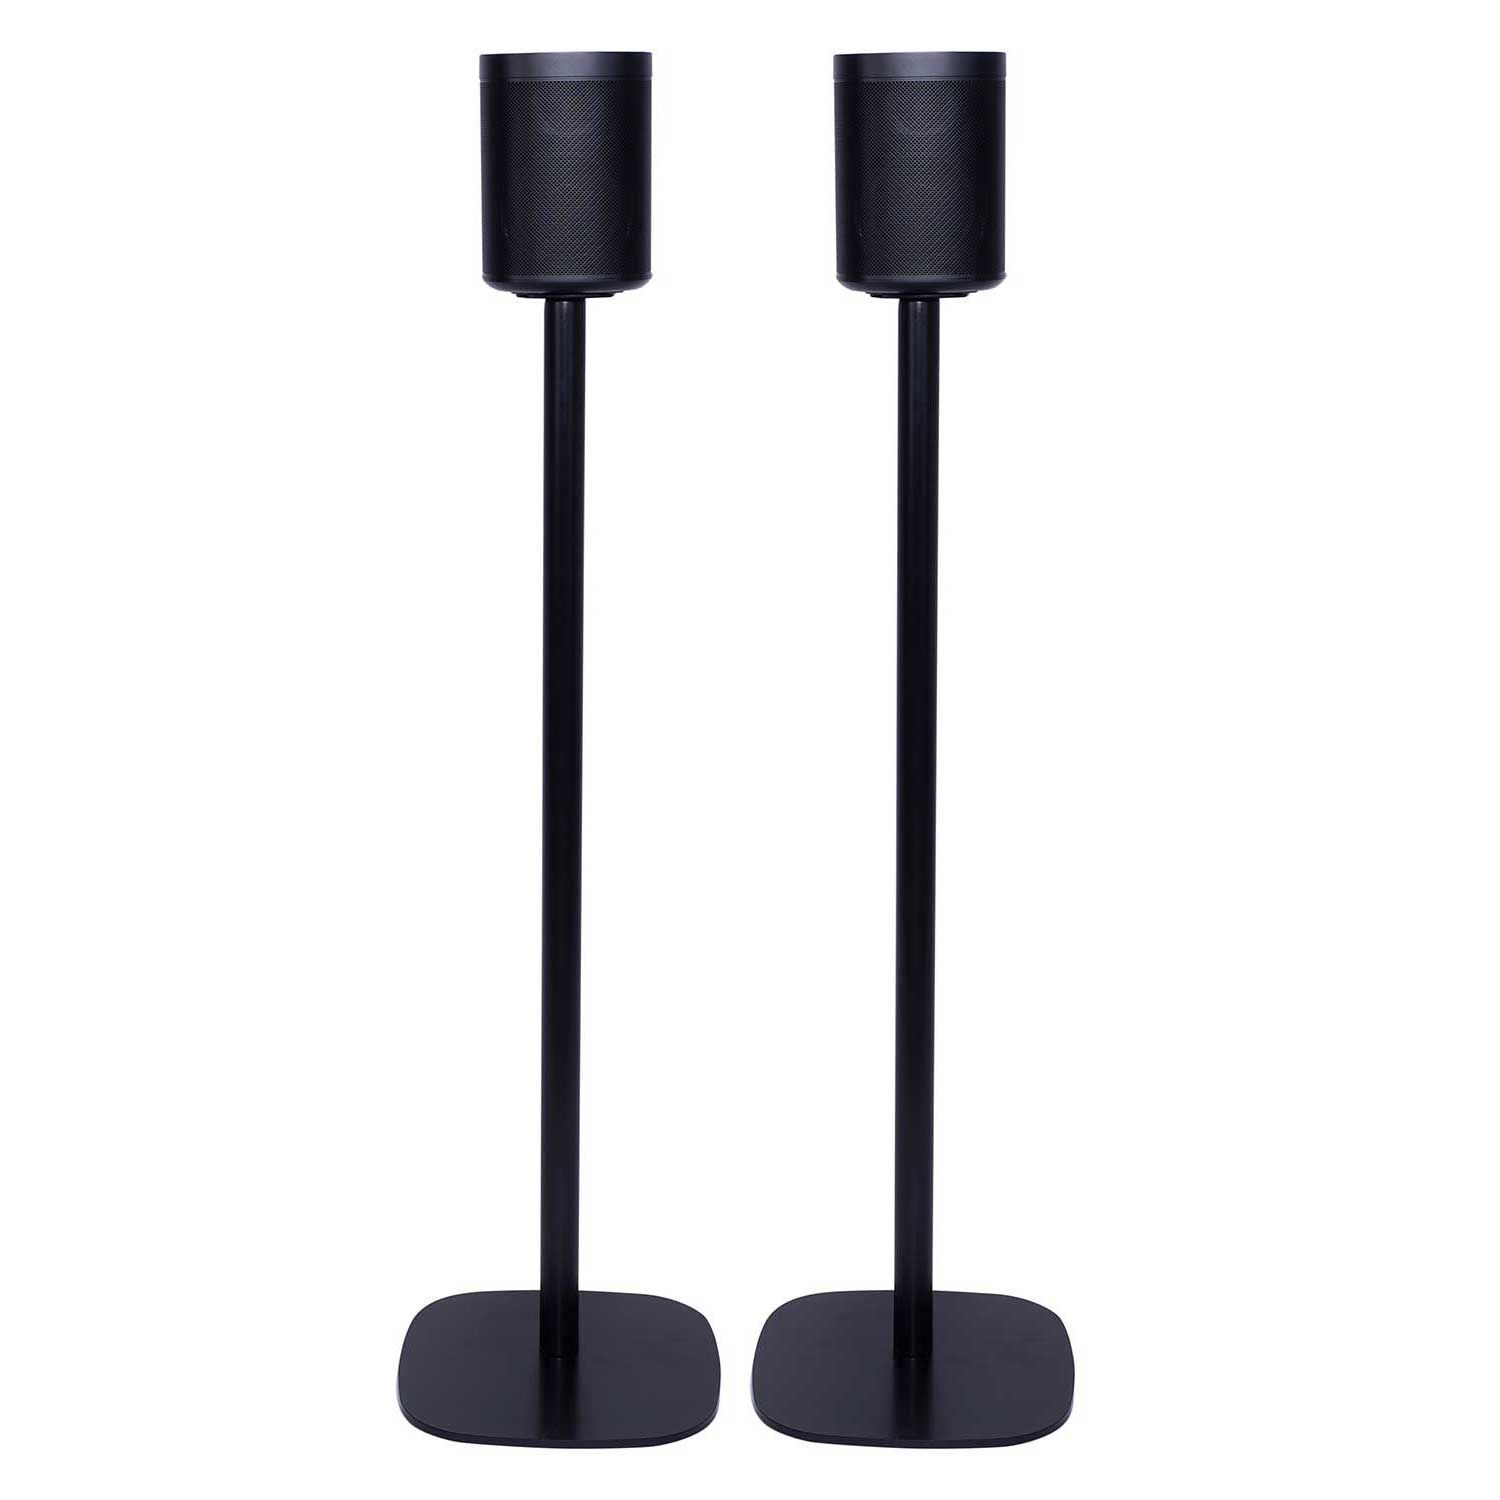 Vebos floor stand Sonos One SL black set | The floor stand for